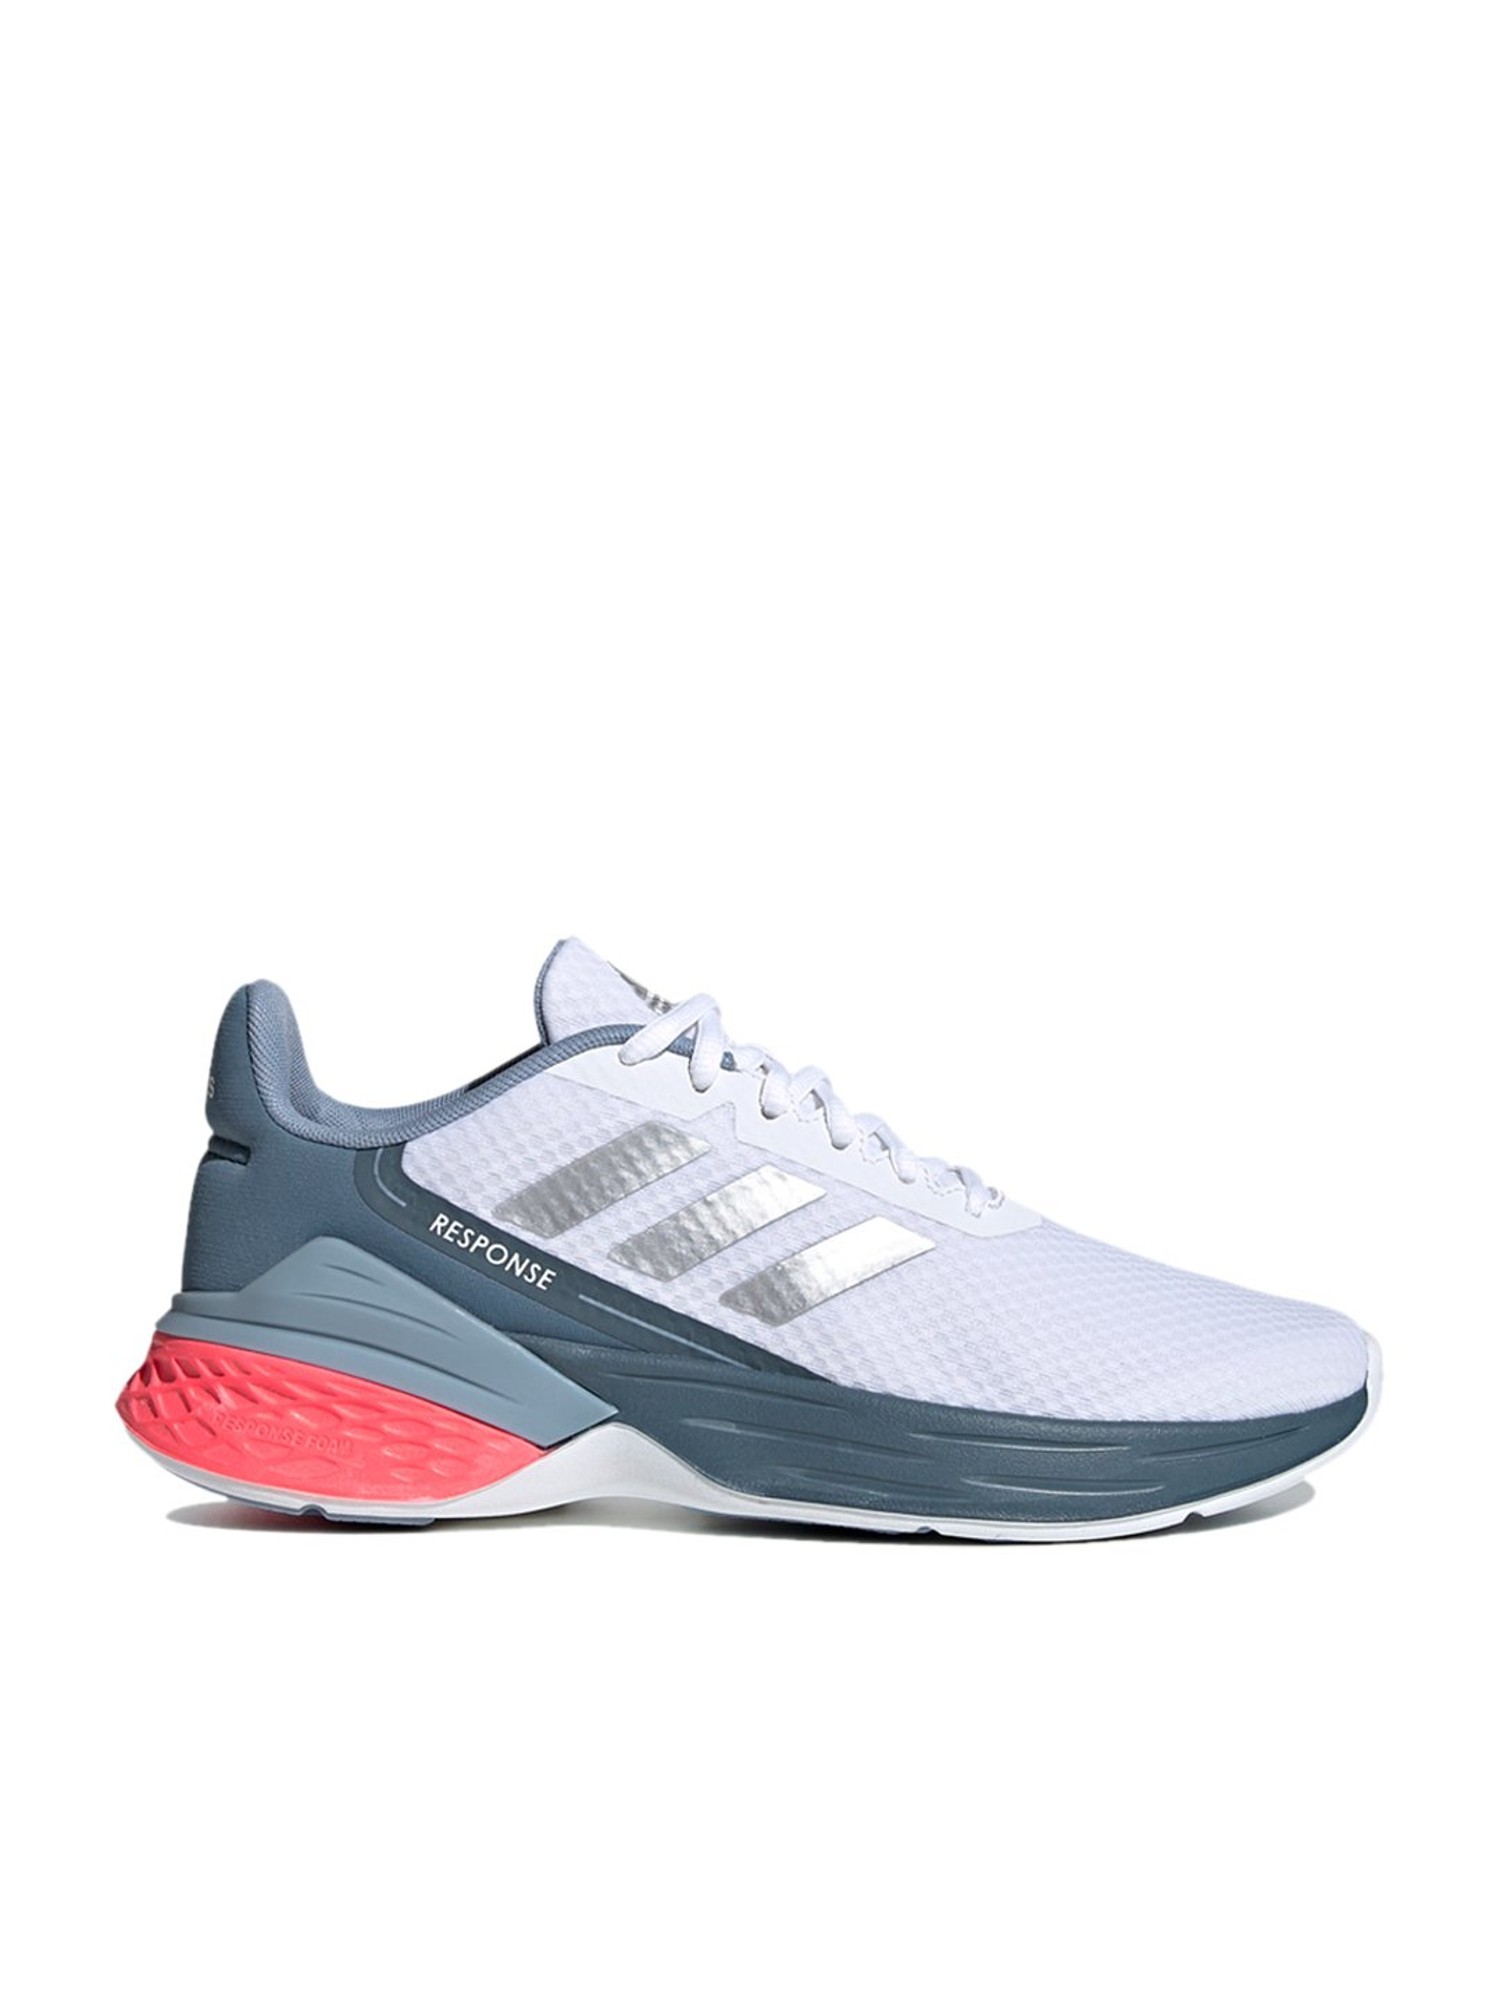 Buy ADIDAS Response Super 3.0 W Mesh Lace Up Women's Sports Shoes |  Shoppers Stop